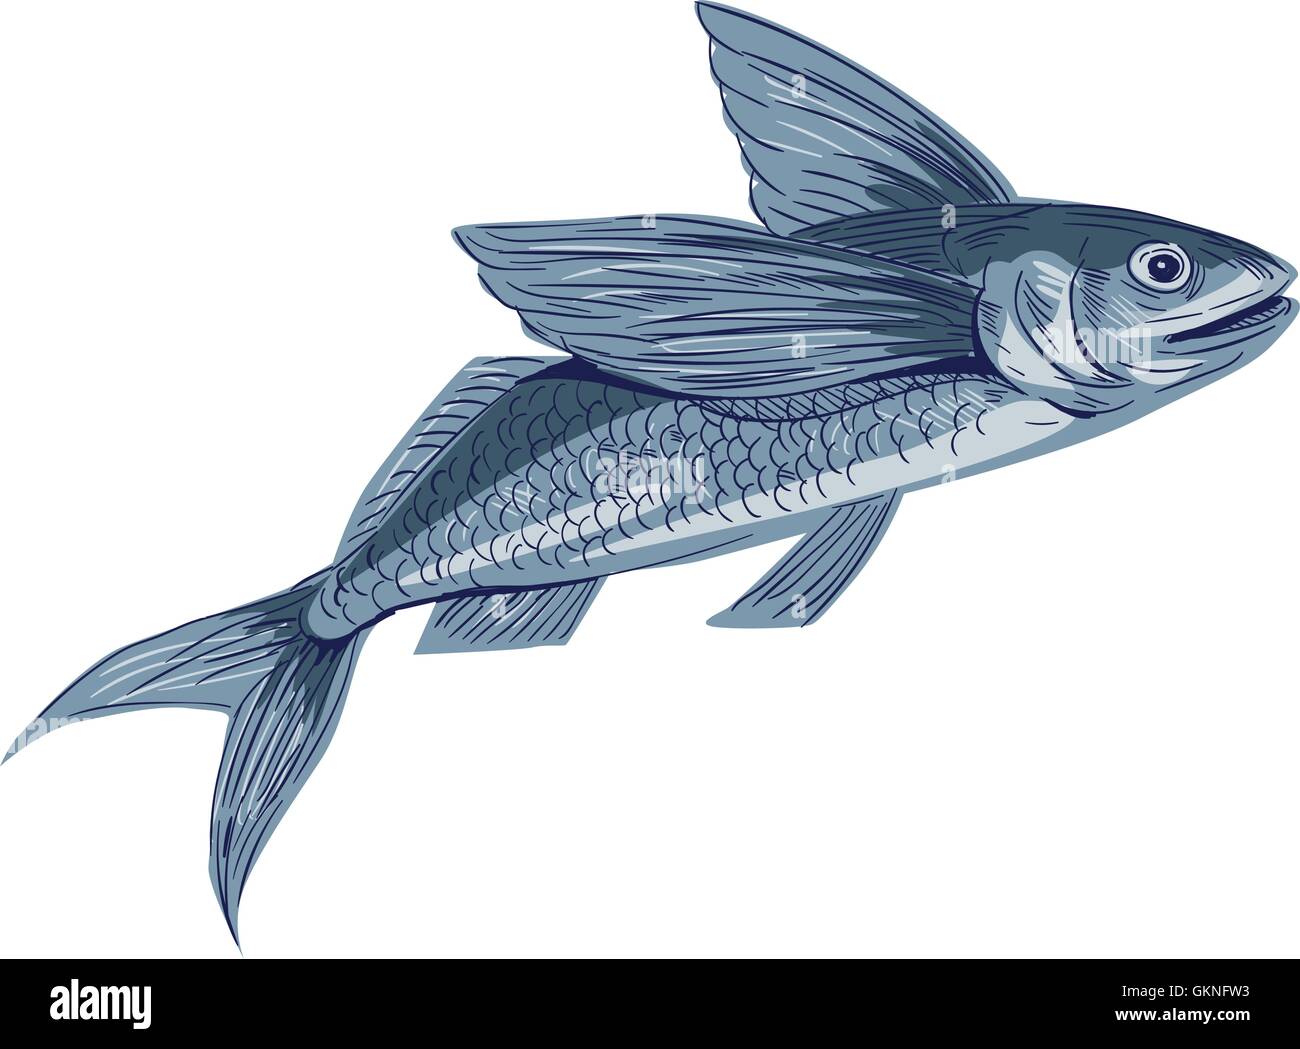 Drawing sketch style illustration of a flying fish or Exocoetidae, a family of marine fish in the order Beloniformes class Actinopterygii viewed from the side set on isolated white background Stock Vector